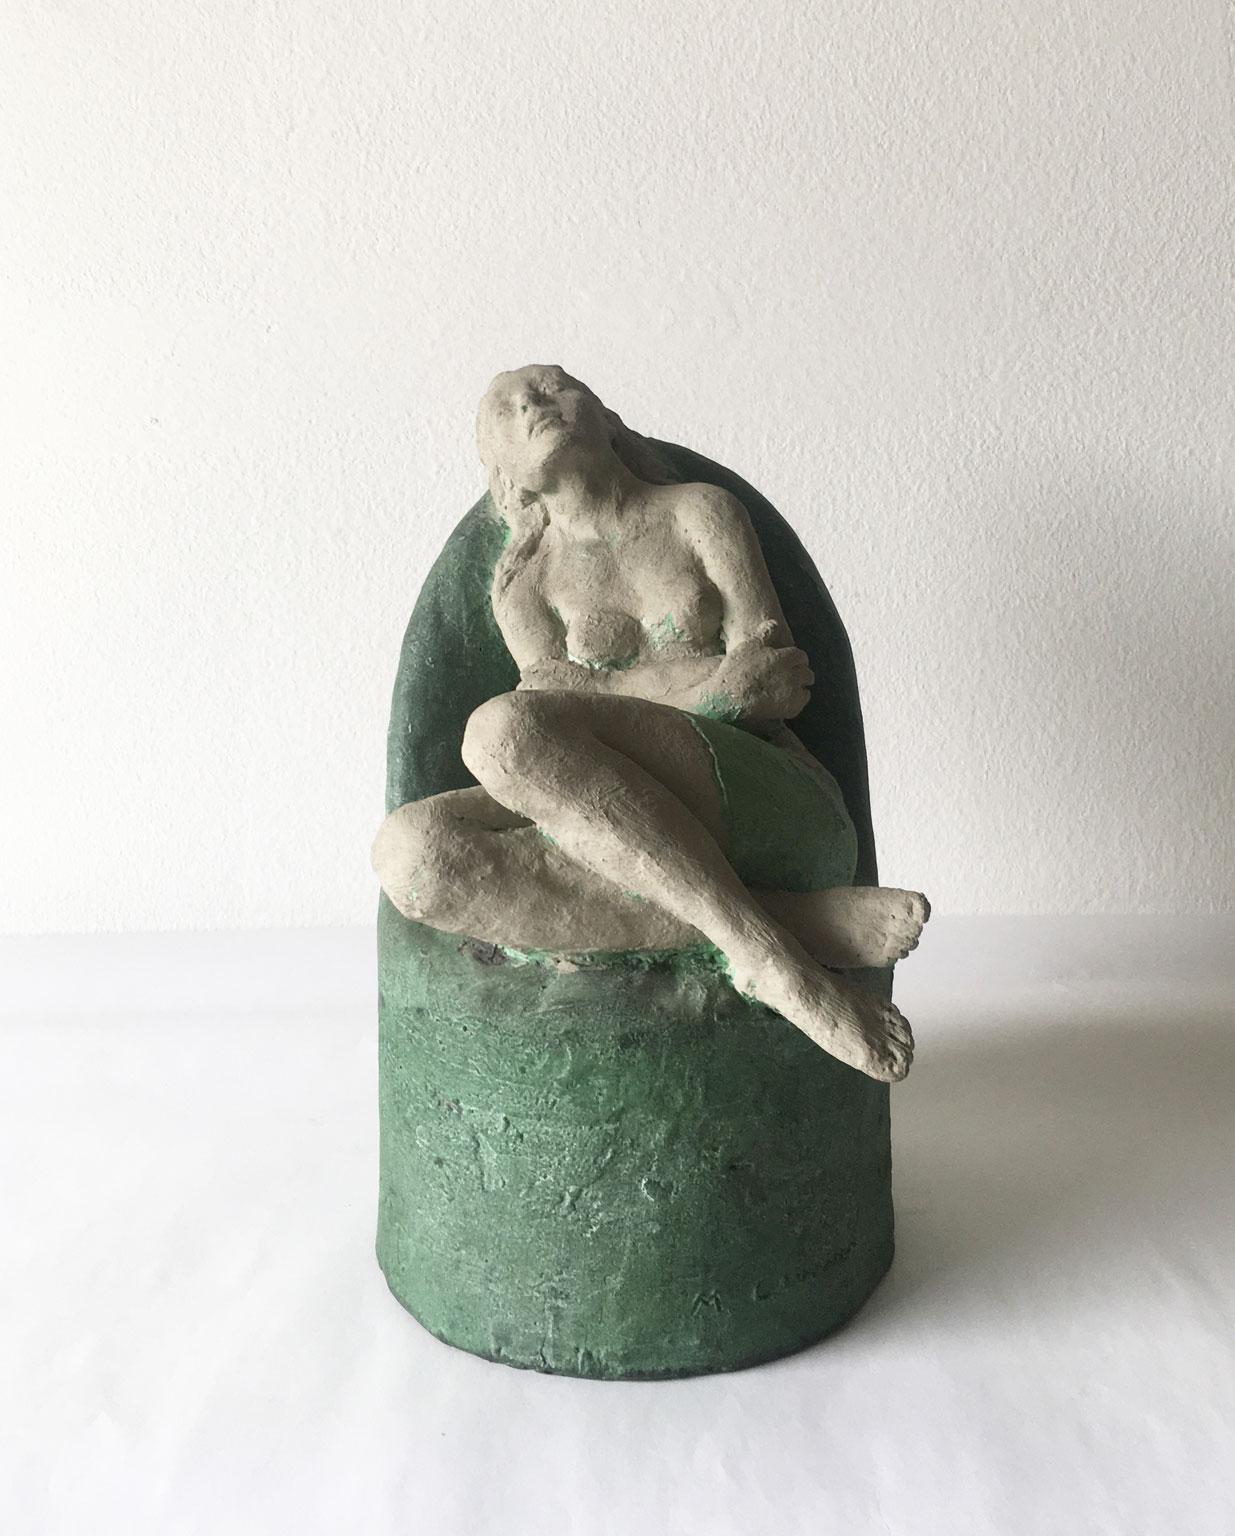 This is a very intense lost wax bronze, and then hand painted, cast in the 1998, by the Italian artist Marco Cornini.
The title is 